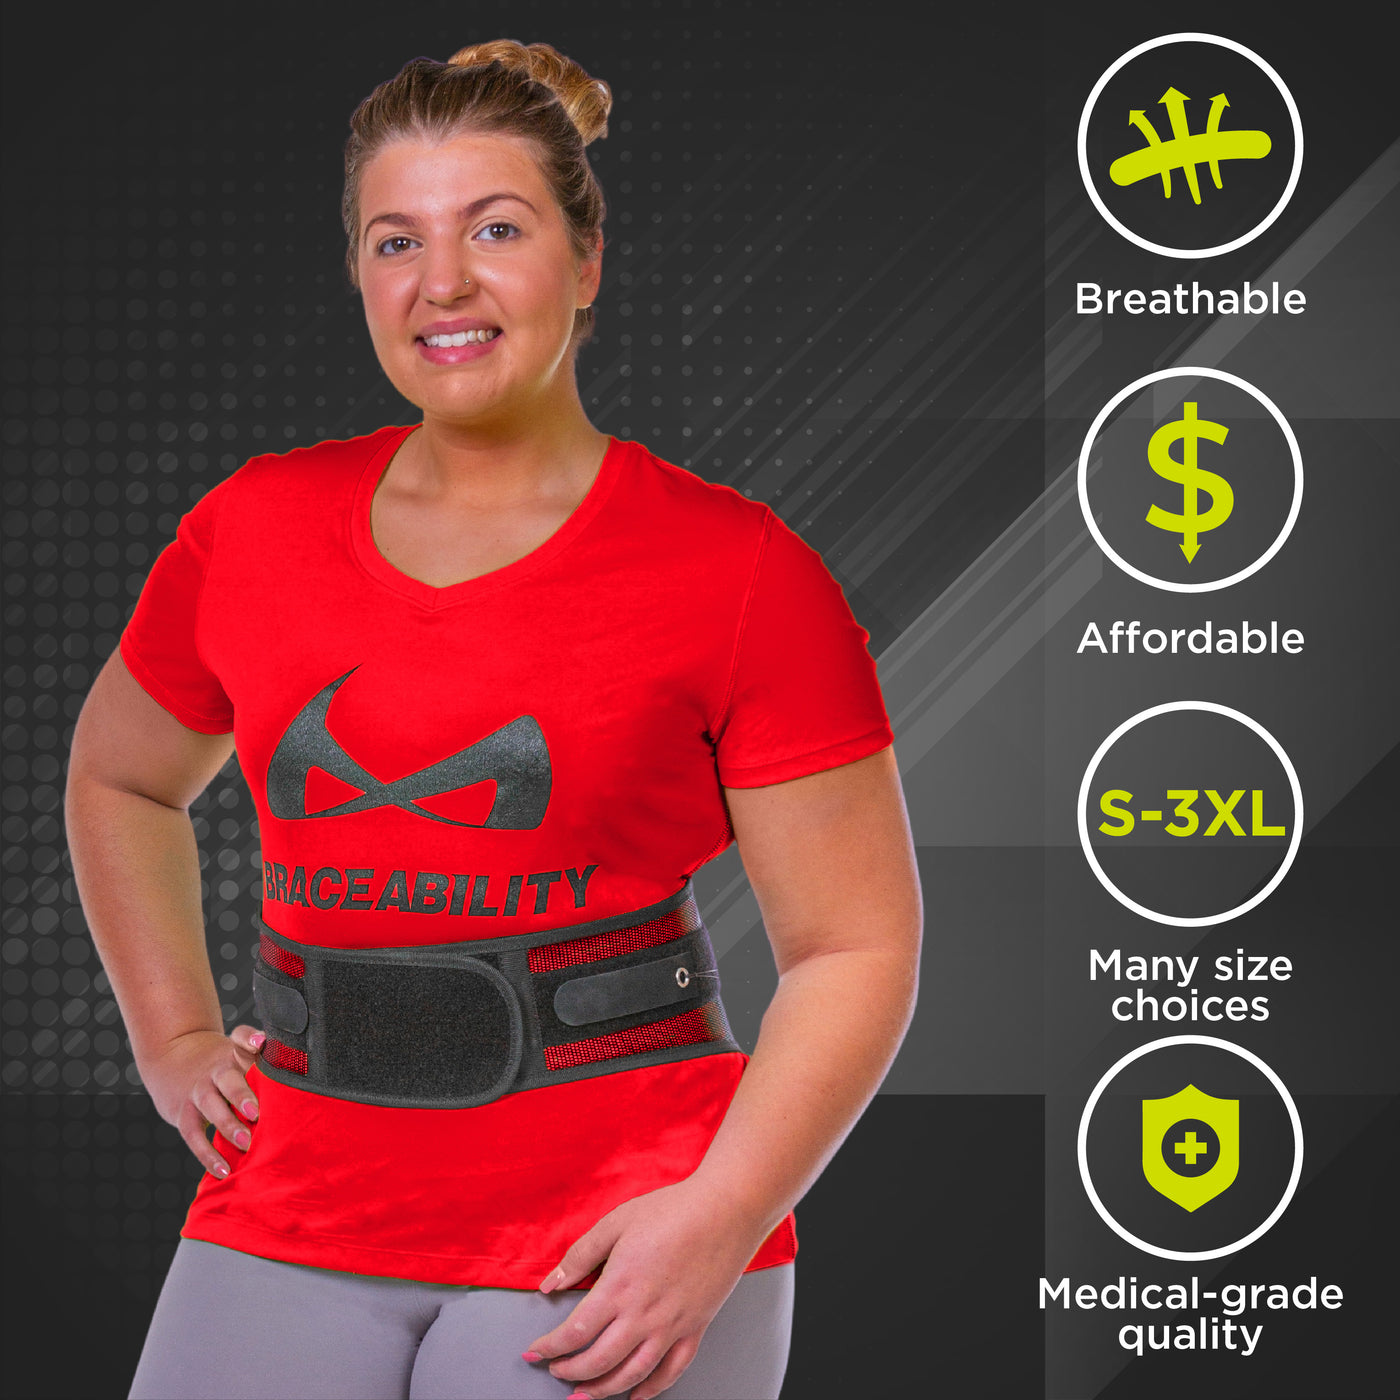 Golfers back brace helps stabilize and support the lumbar spine